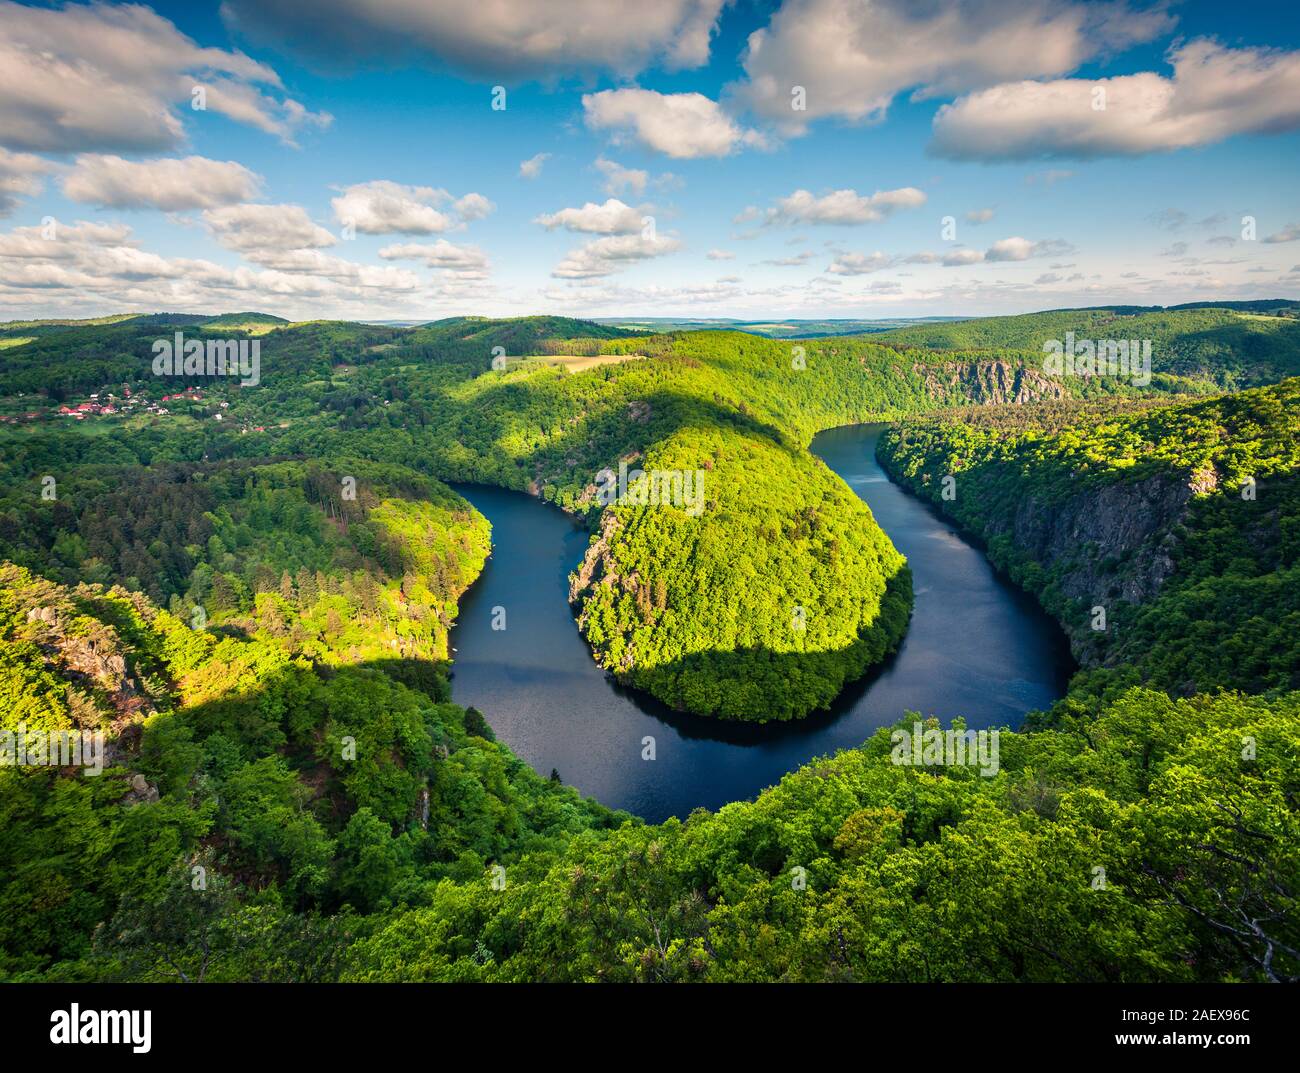 Sunny view of Vltava river horseshoe shape meander from Maj viewpoint. Colorful spring scene in Czech Republic. Artistic style post processed photo. Stock Photo